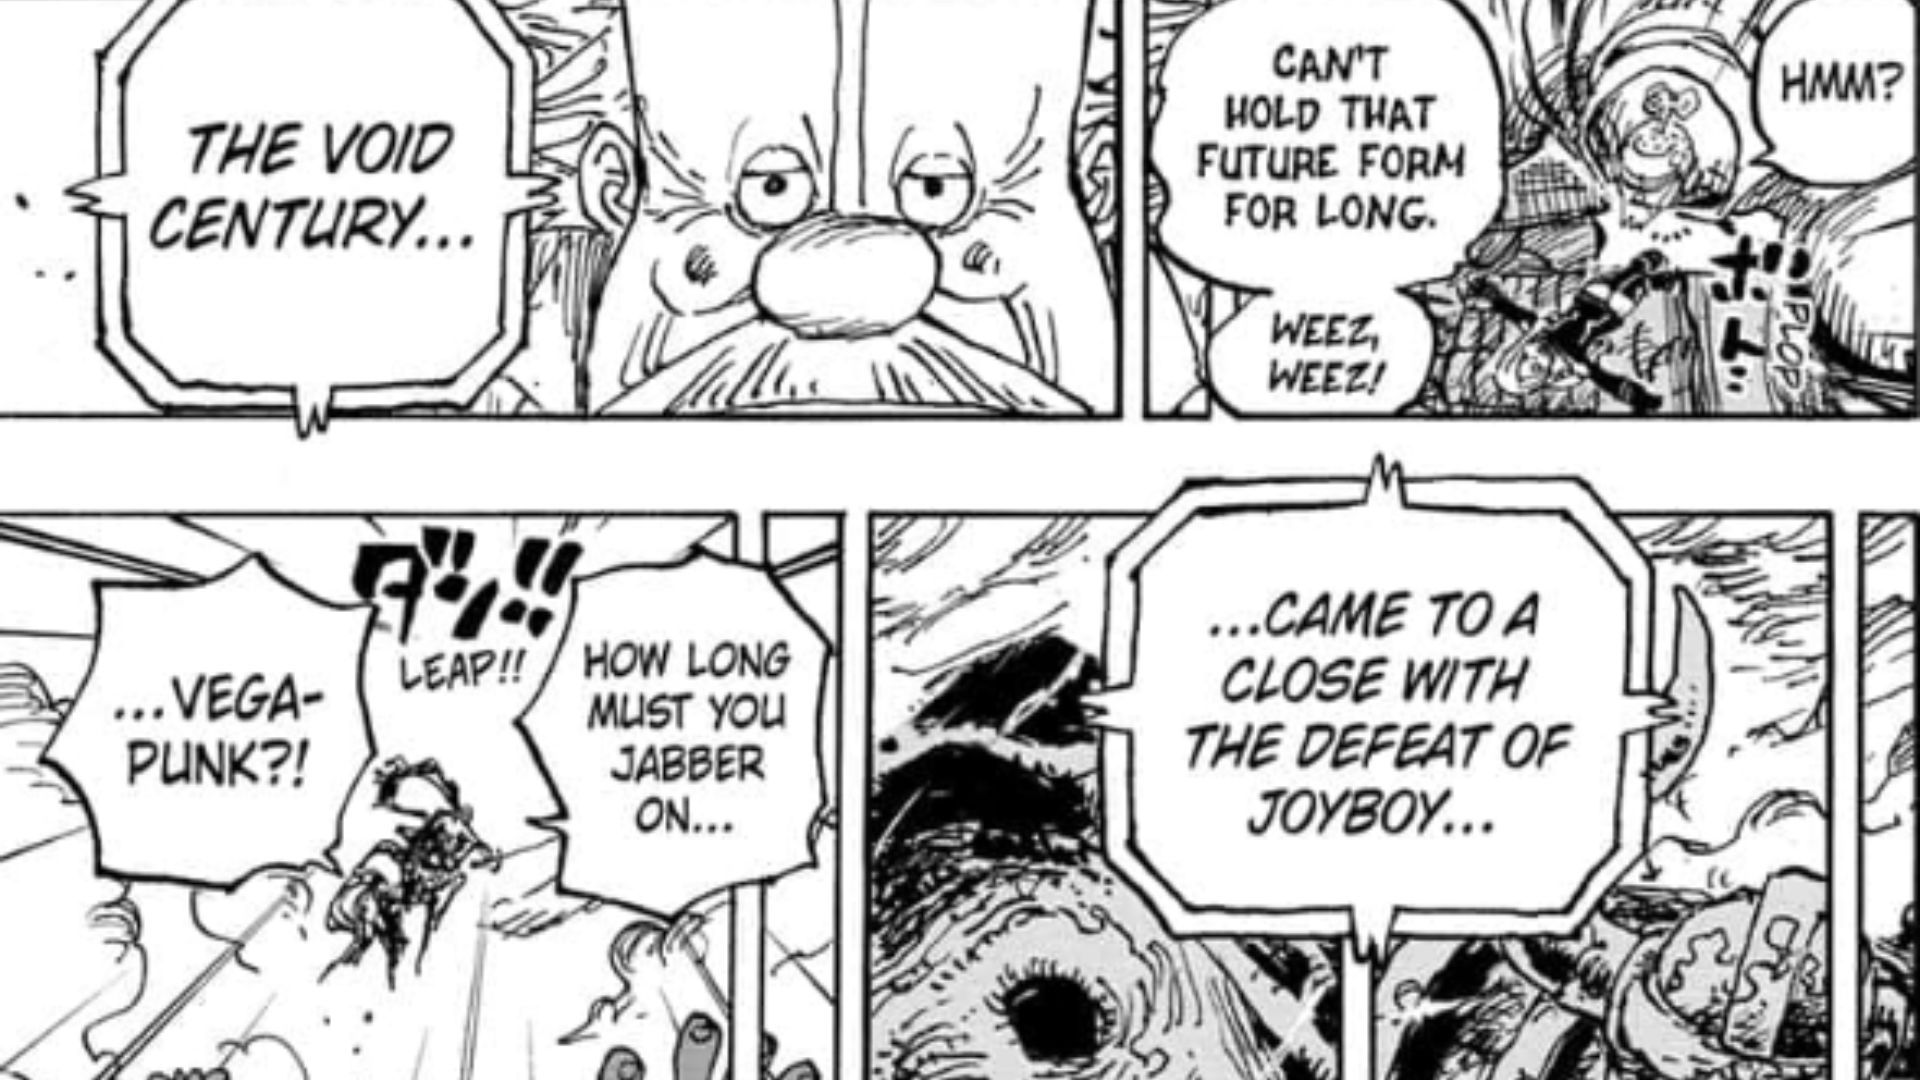 A panel from One Piece Chapter #1115 feature Vegapunk exclaming that the void century came to end Joyboy's defeat.